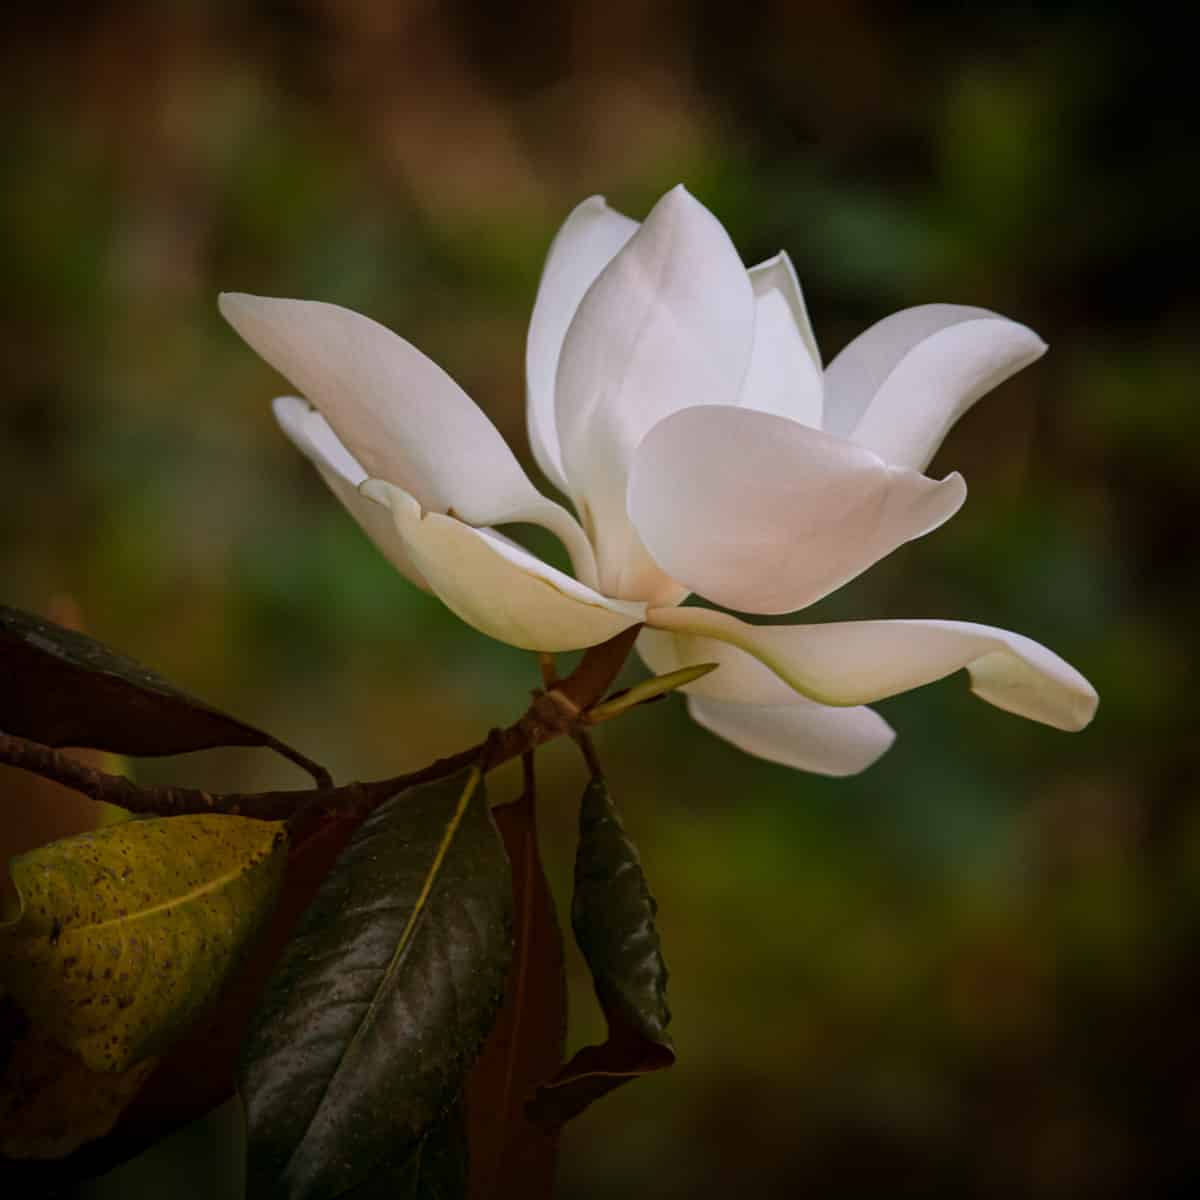 This lovely southern magnolia bloom has just opened. It will close overnight, then re-open and soon turn brown.